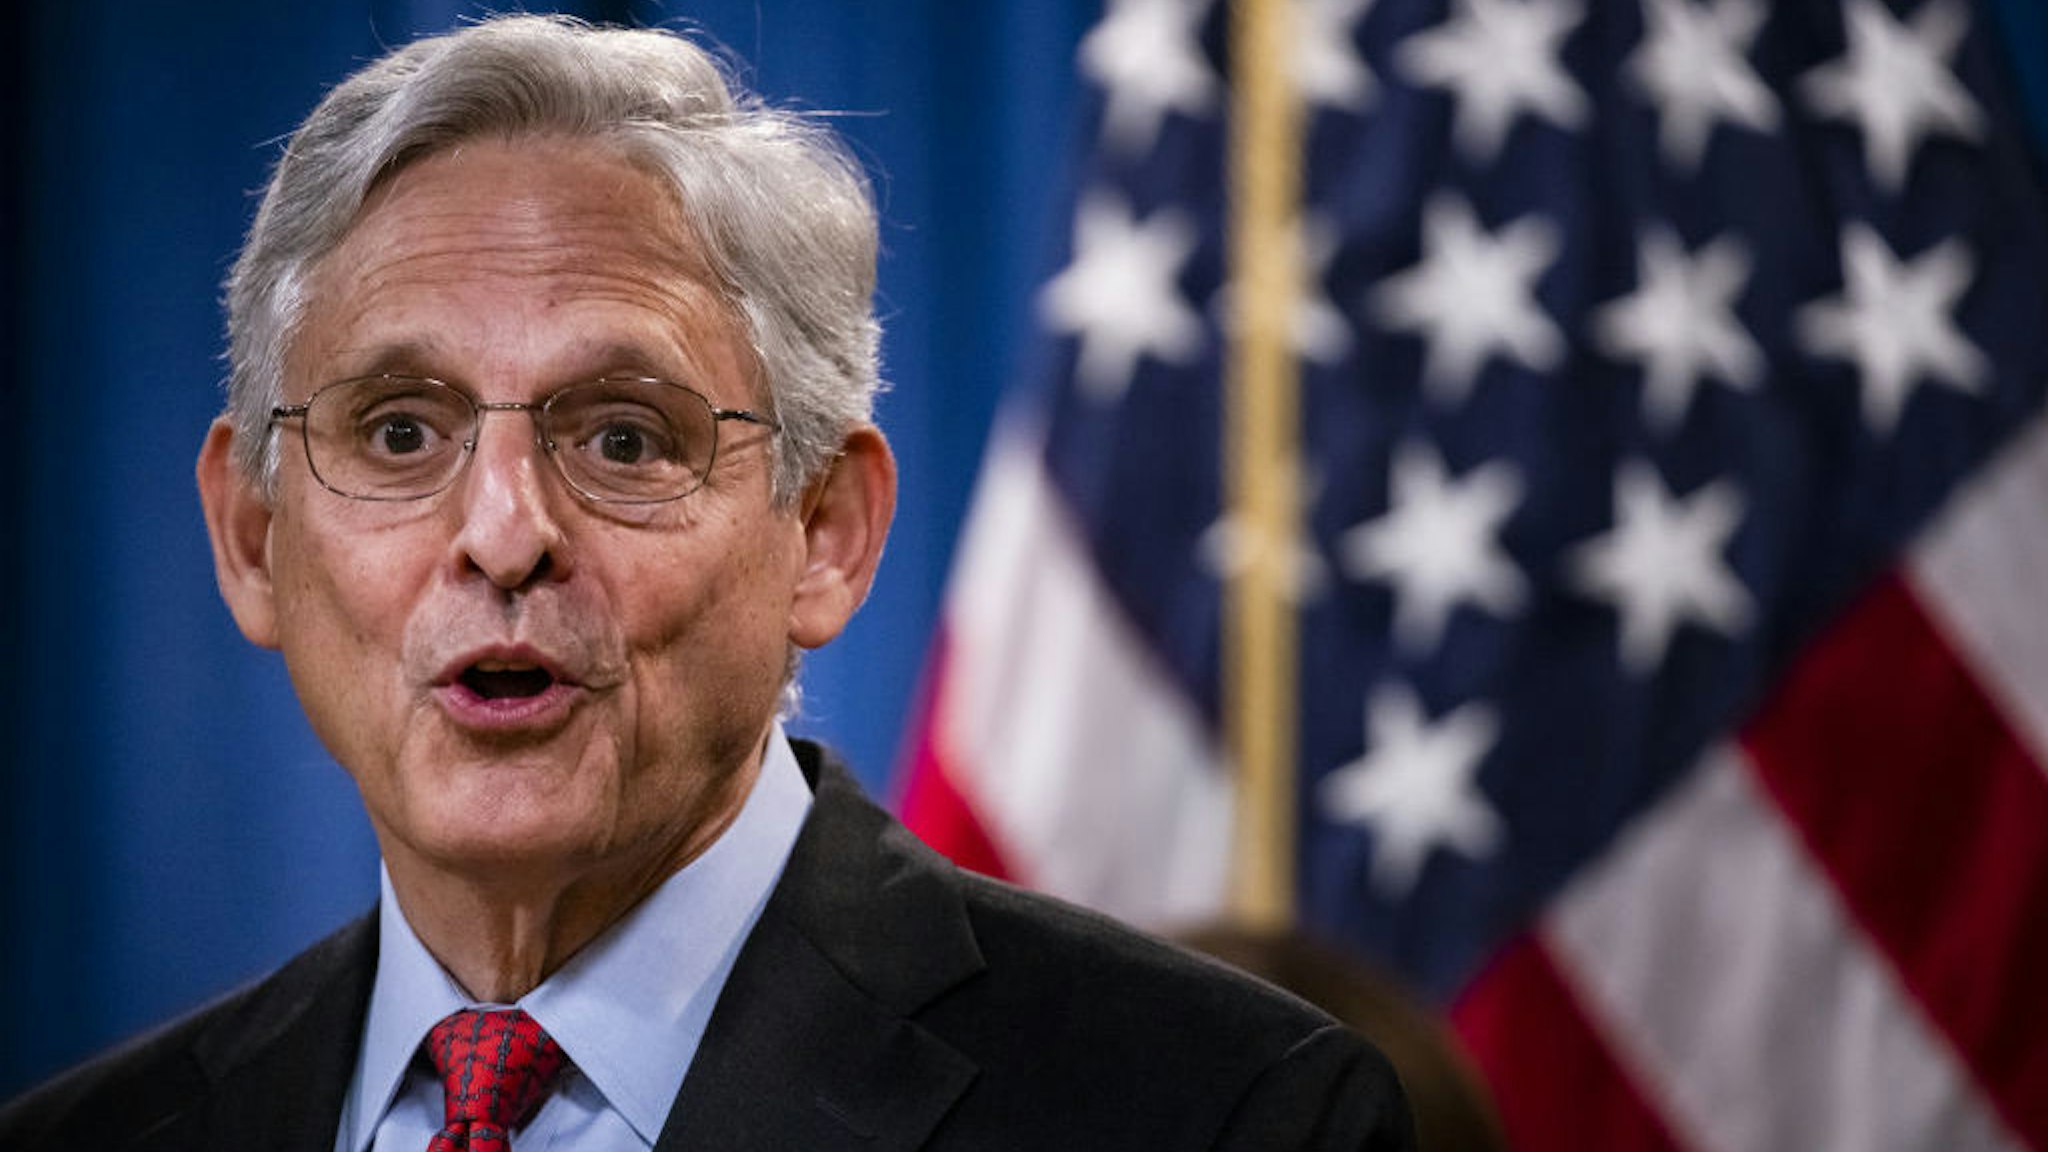 Merrick Garland, U.S. attorney general, speaks during a news conference at the Department of Justice in Washington, D.C., U.S., on Thursday, Sept. 9, 2021. The U.S. sued Texas to block a law that effectively bans abortions in the state after six weeks, calling it unconstitutional. Photographer: Samuel Corum/Bloomberg